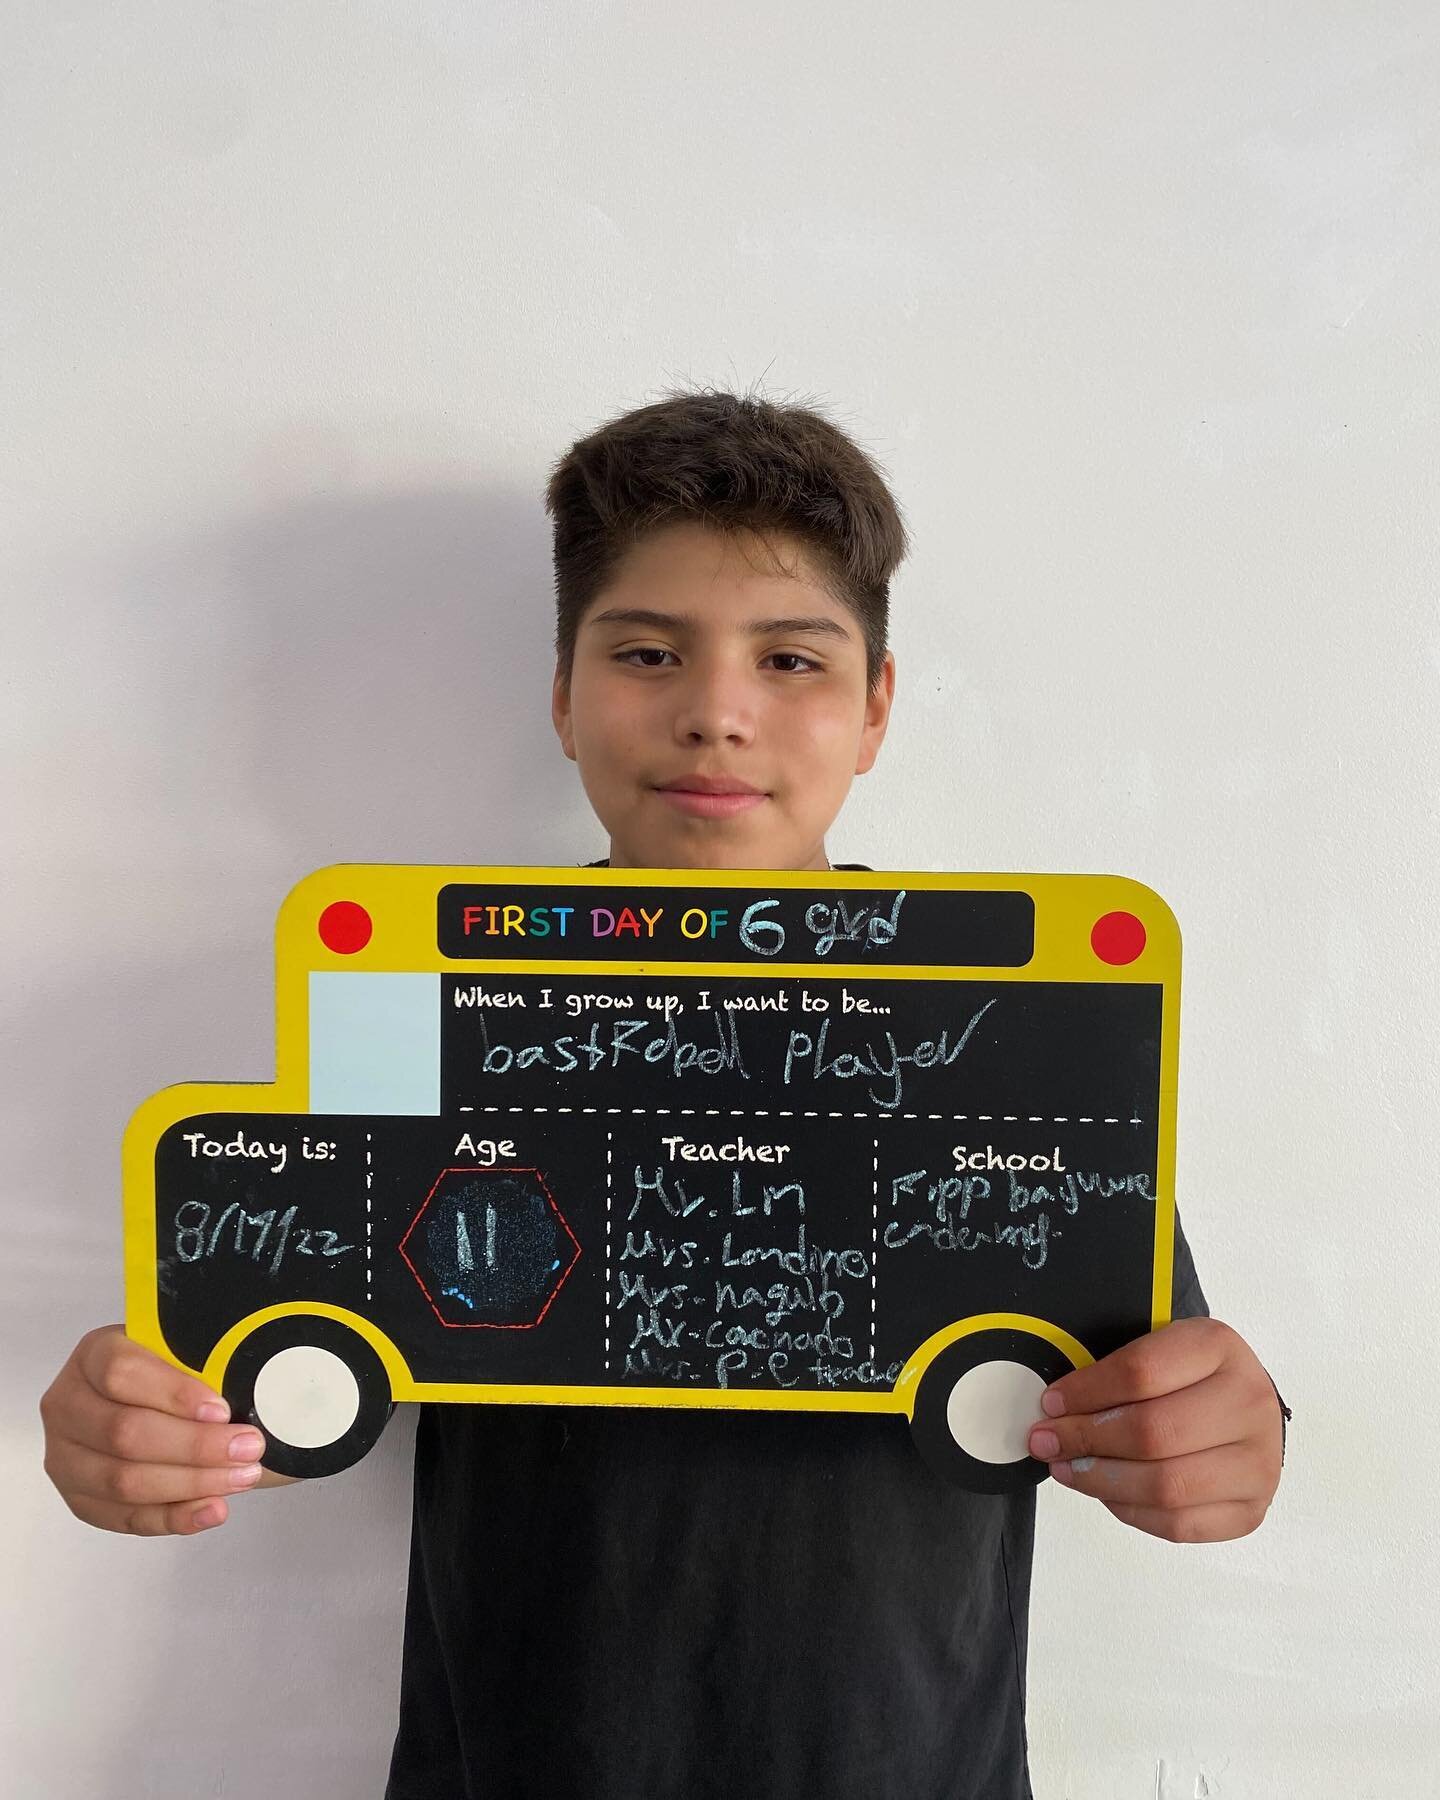 Its Back-to-school season! 📚🧠

Check out Christopher &amp; Sephora, incoming 6th &amp; 5th graders, who share what they want to be when they grow up 😝 #FutureCEO #FutureBasketballer